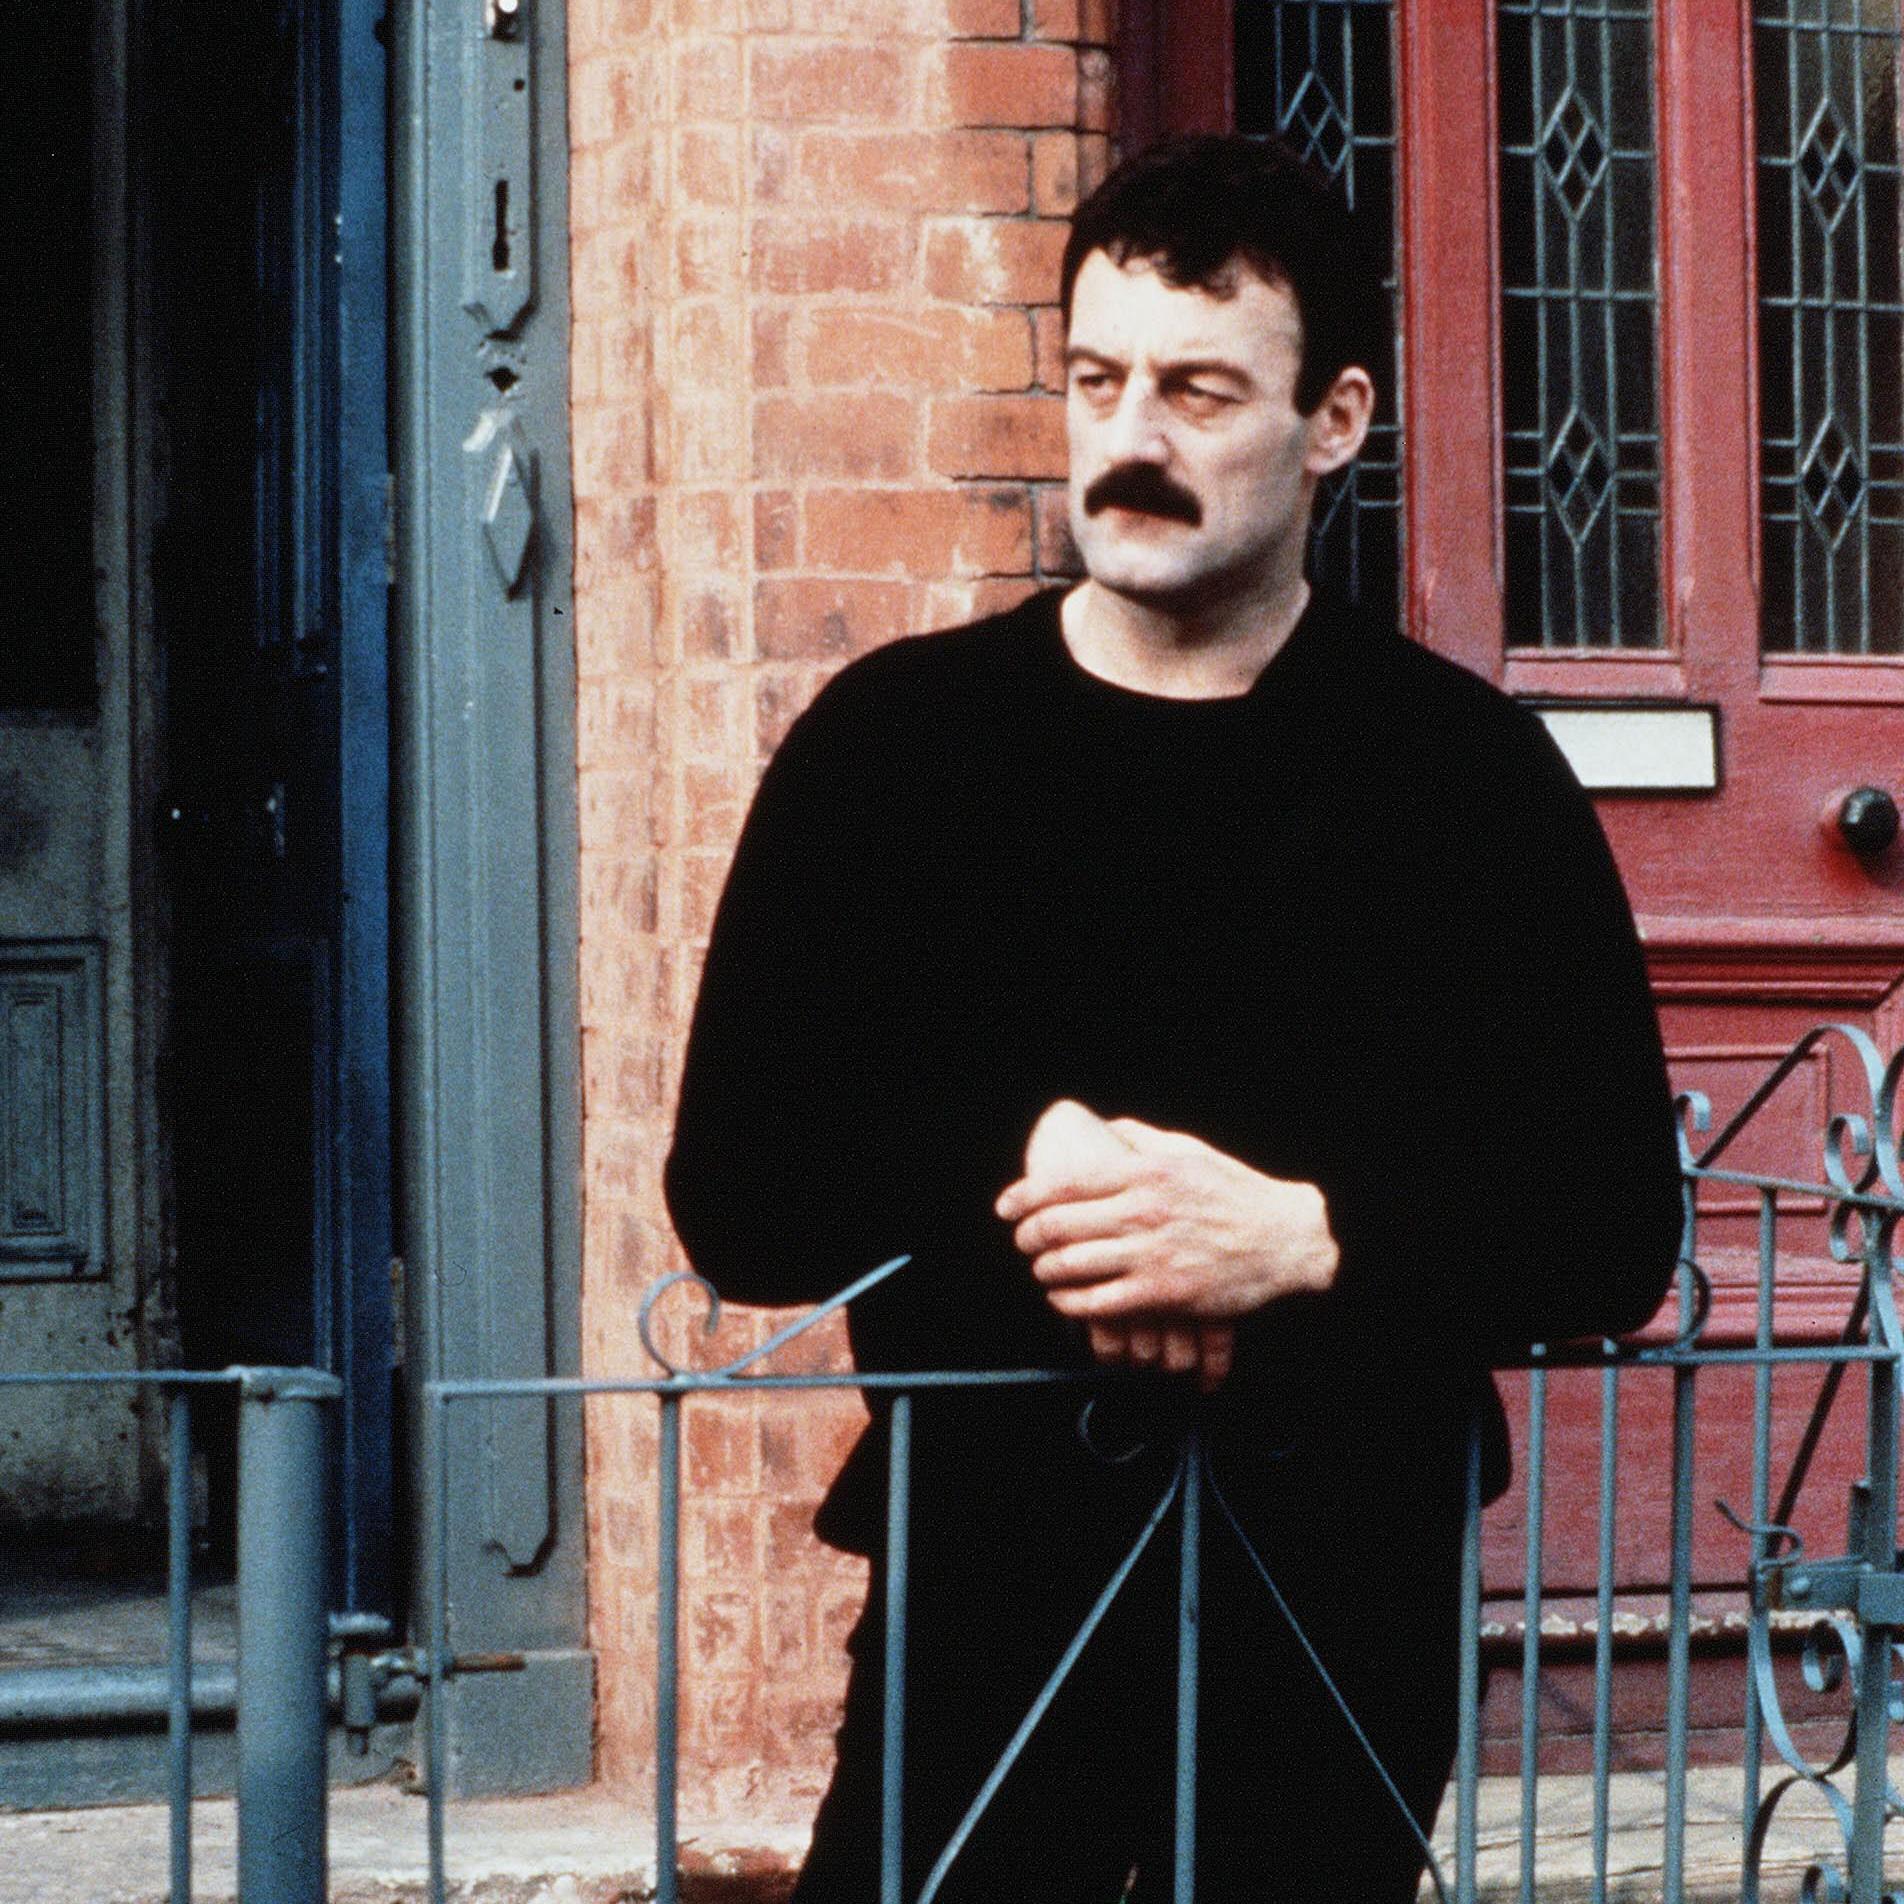 Hill as Yosser Hughes in Boys from the Blackstuff